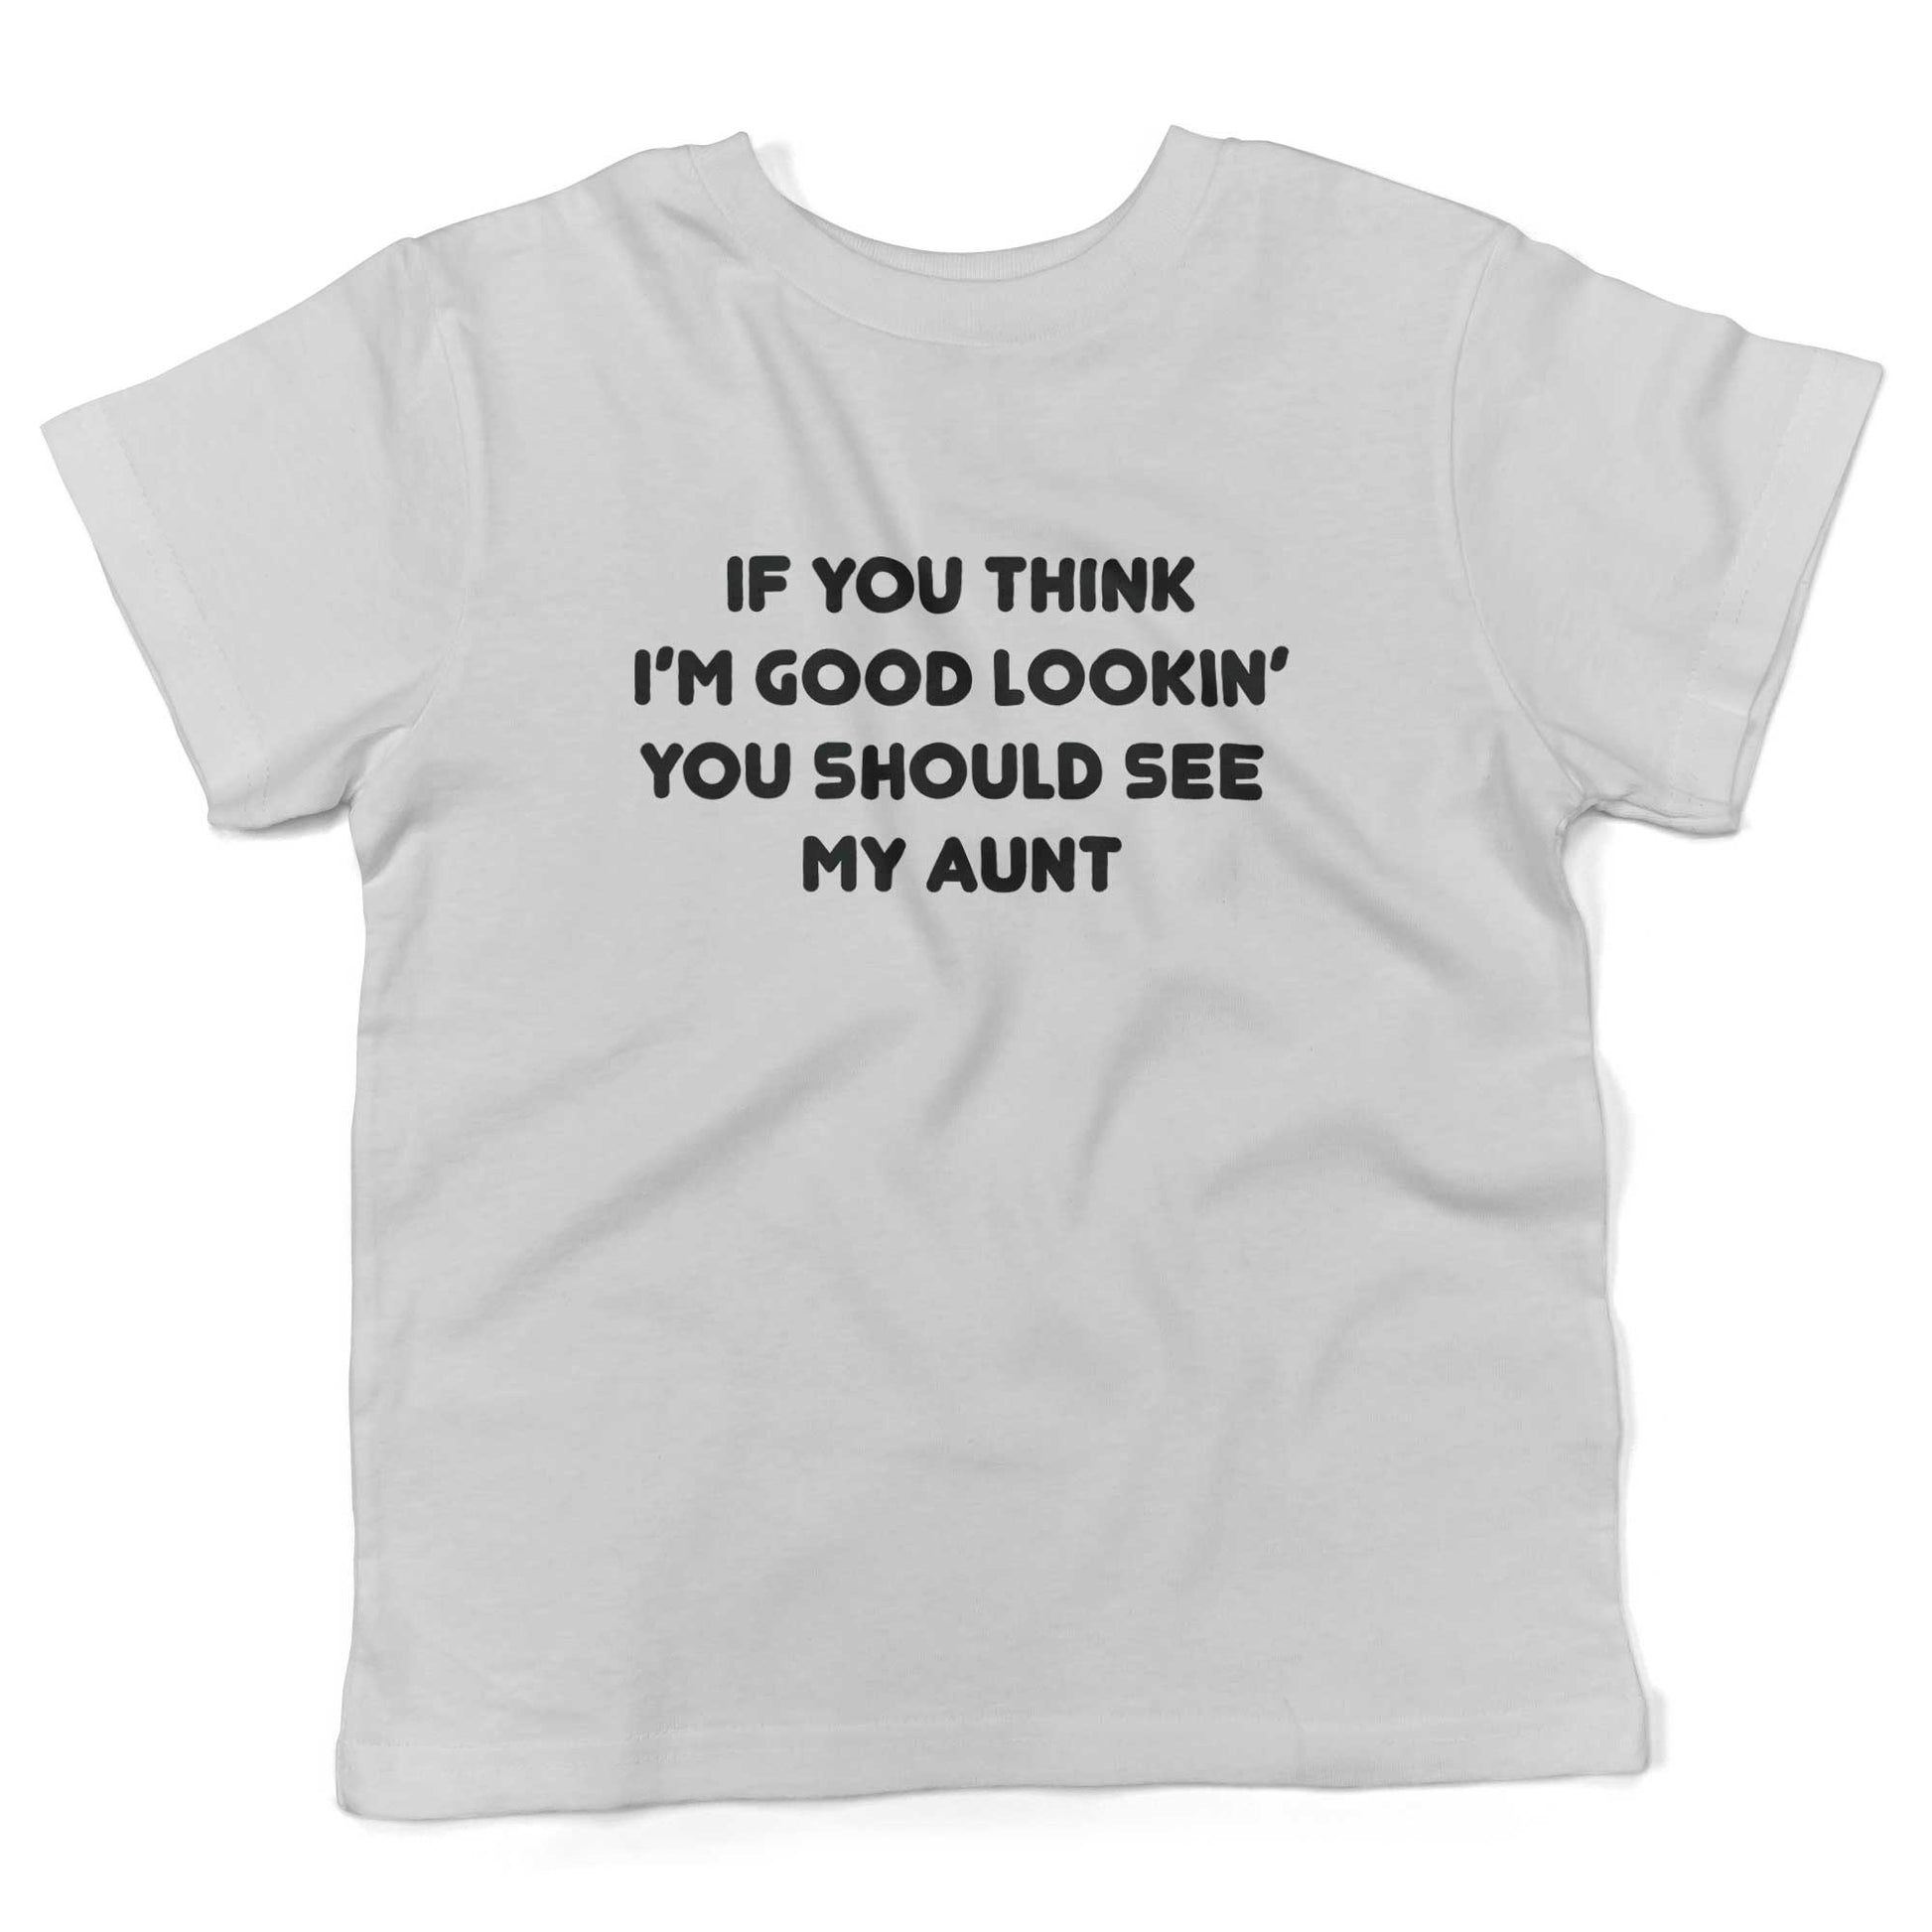 If You Think I'm Good Lookin' You Should See My Aunt Toddler Shirt-White-2T